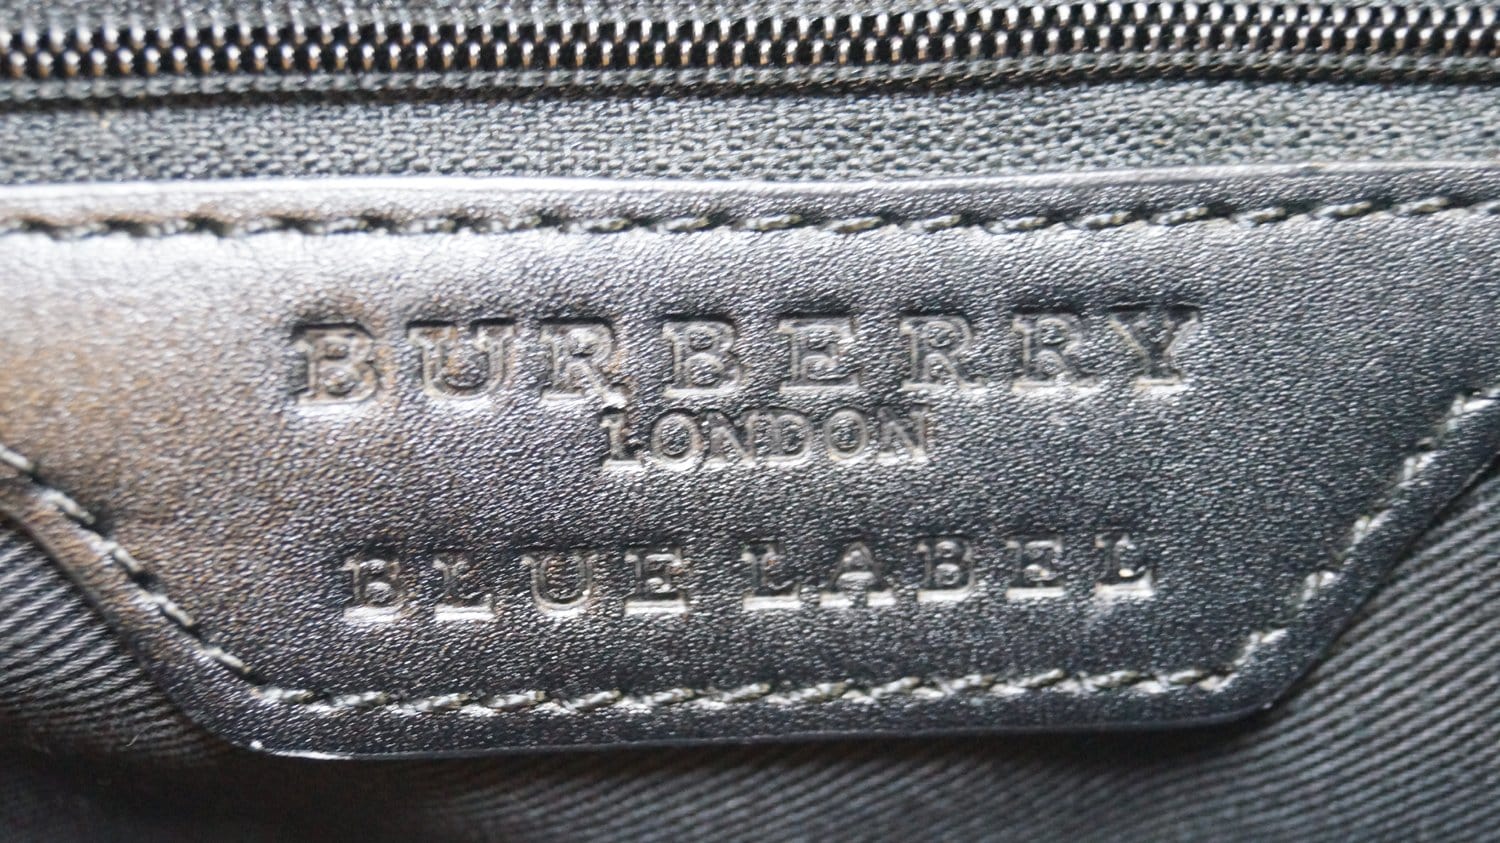 Burberry Blue Label Some light marks on the leather handles